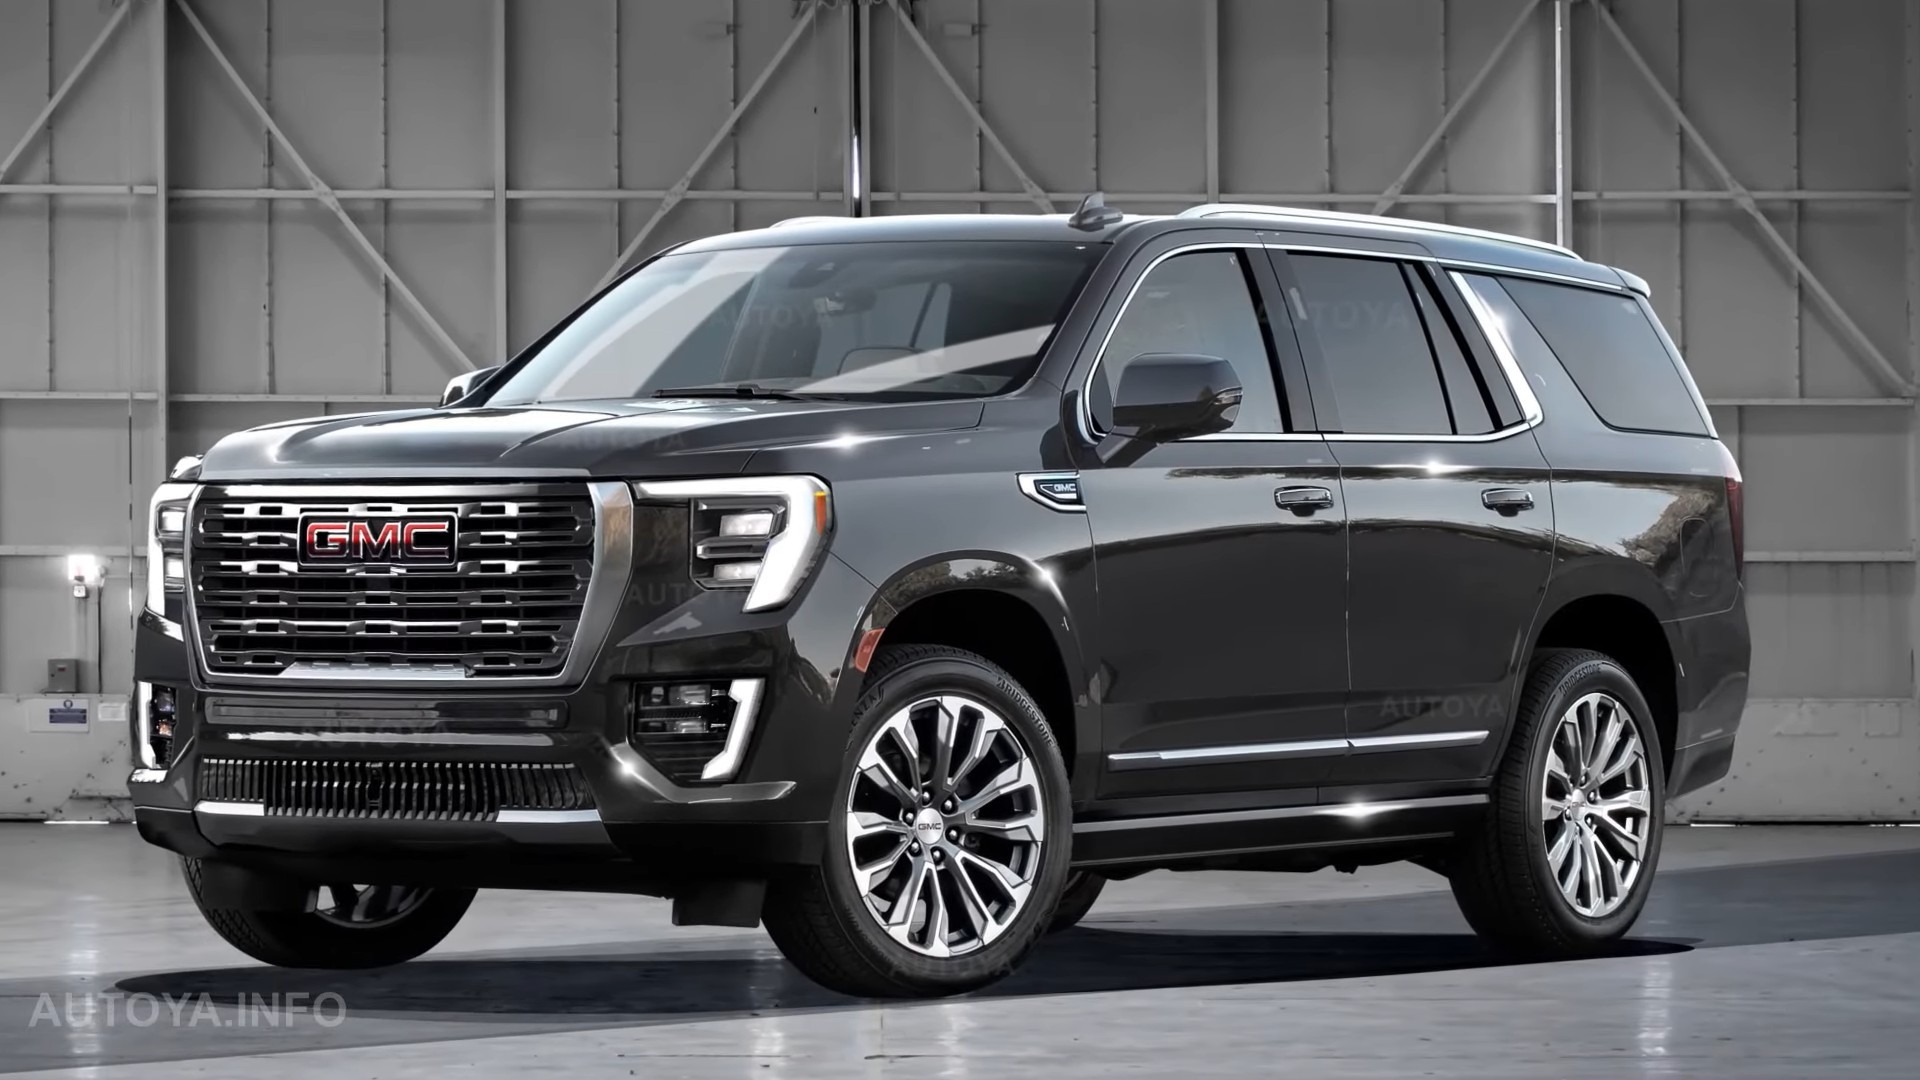 Redesigned 2024 GMC Yukon SUV Unofficially Flaunts Only the Ritzy Color